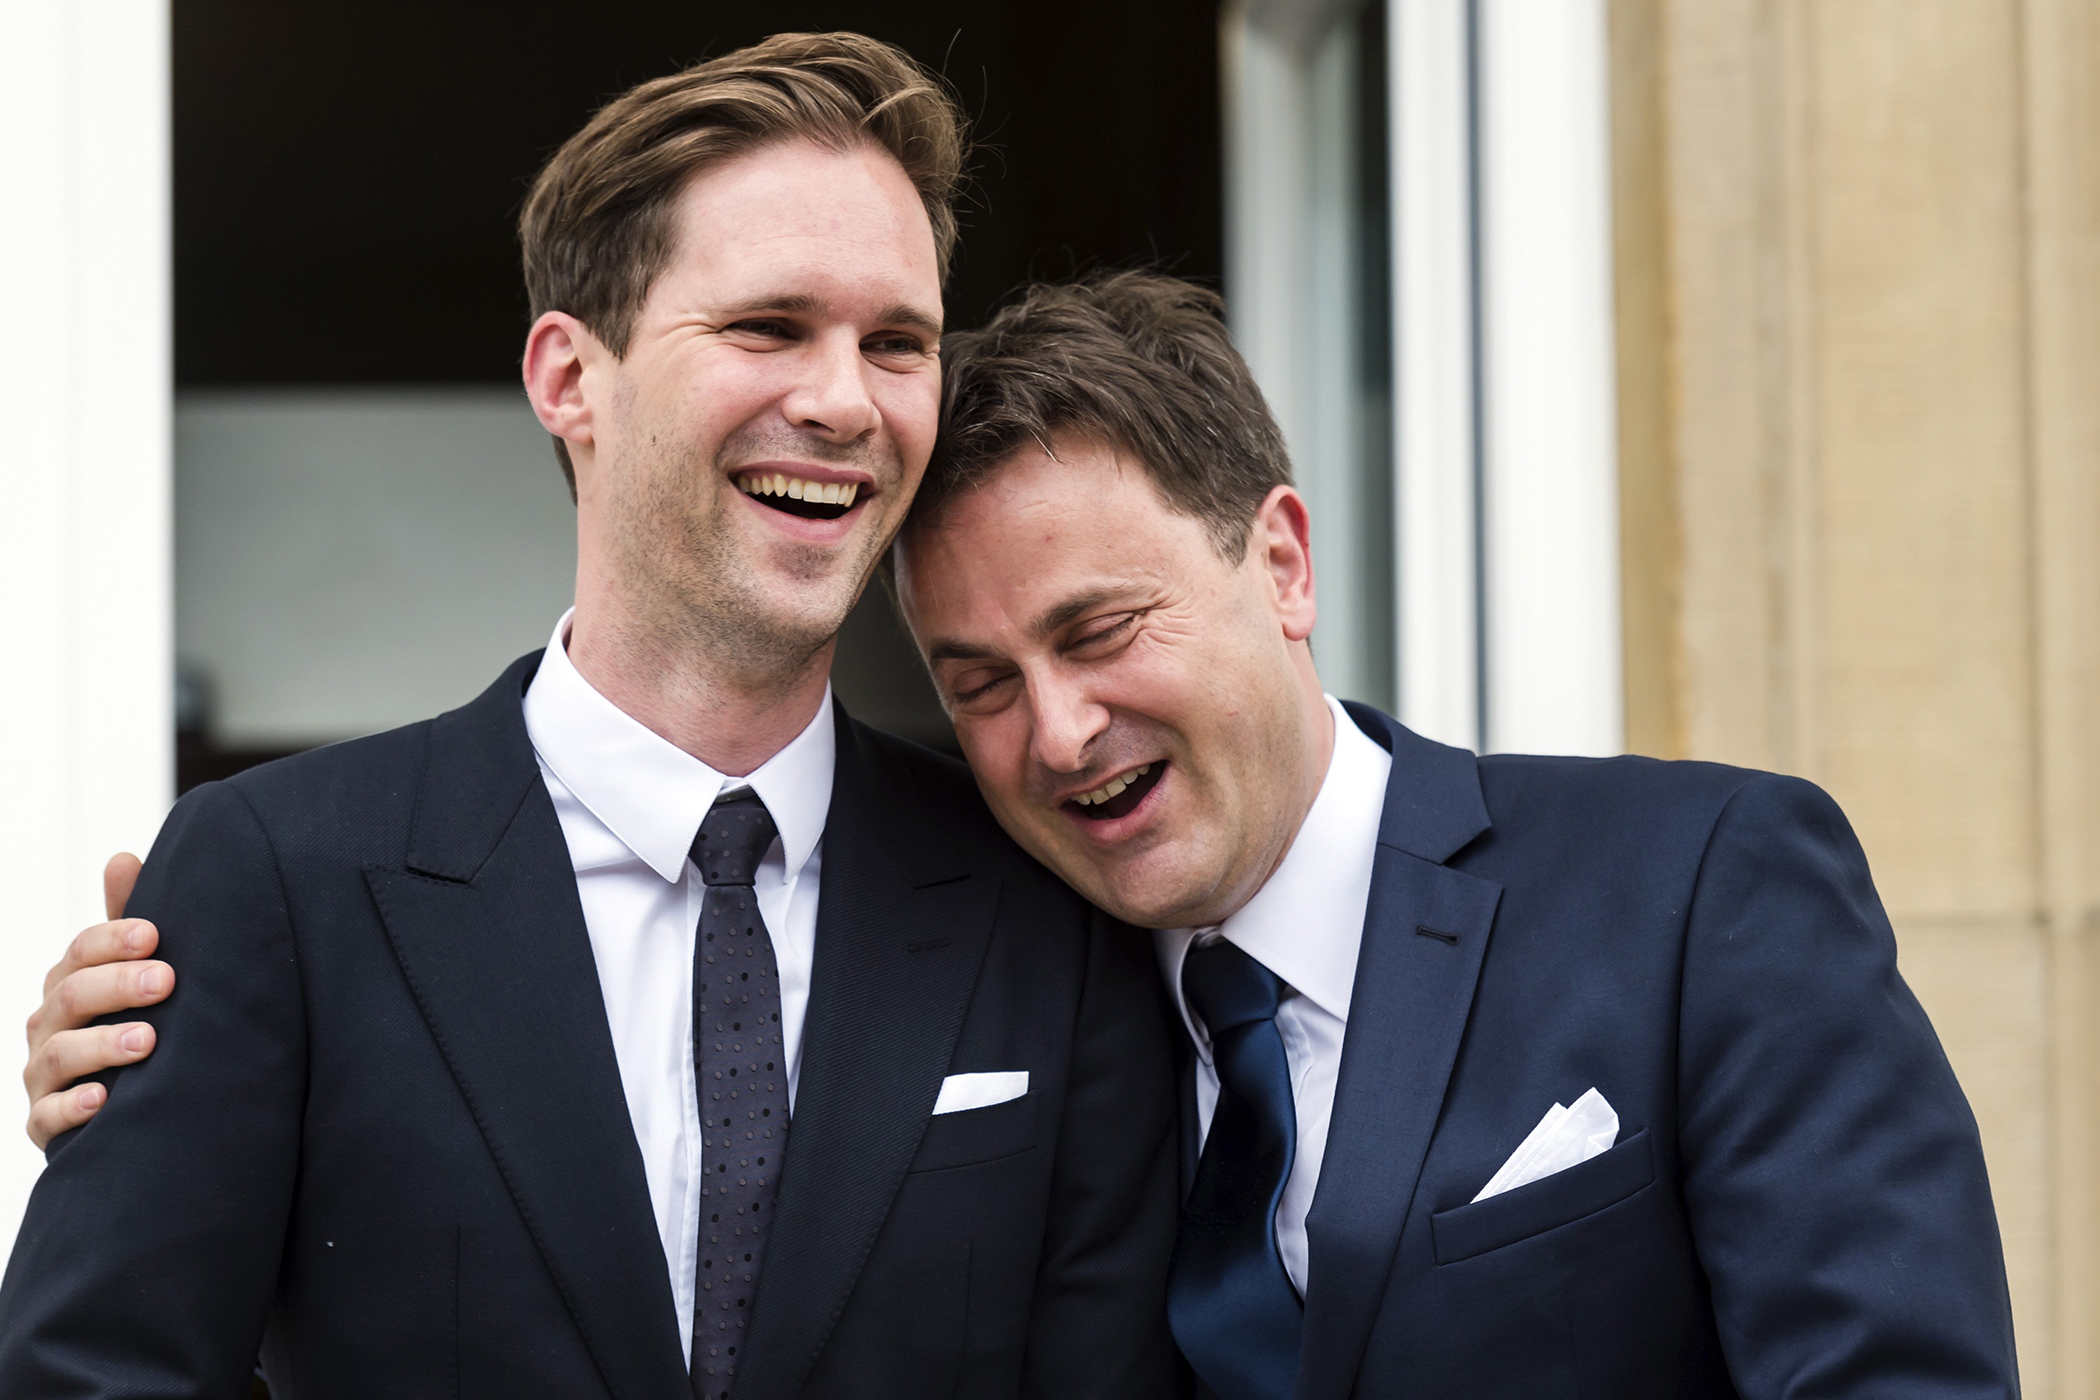 Luxembourg Prime Minister Xavier Bettel marries same-sex partner pic picture